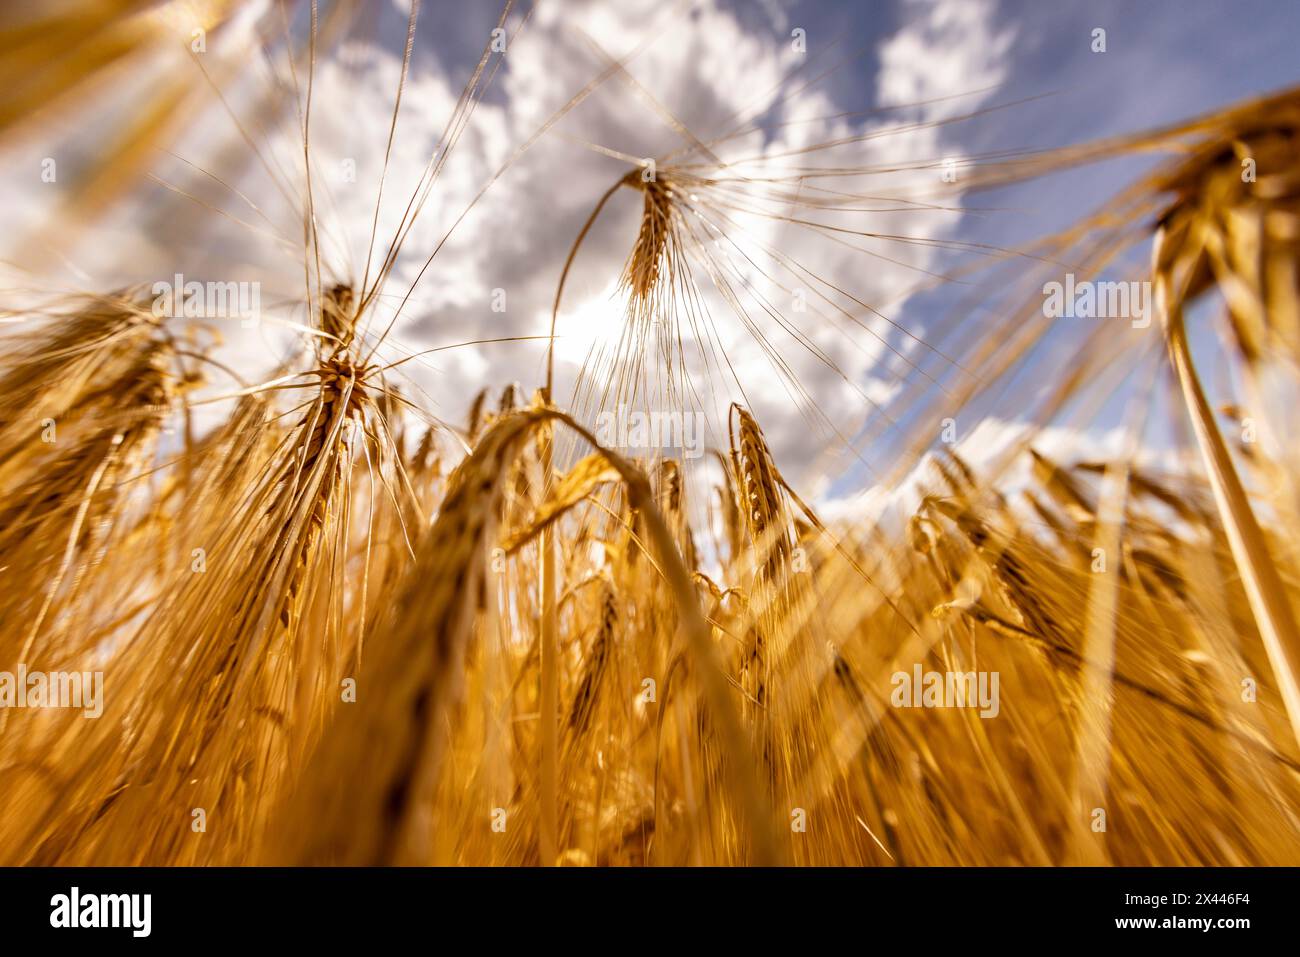 Sun shining through a grain field with Barley under a blue sky with white clouds, Cologne, North Rhine-Westphalia, Germany Stock Photo